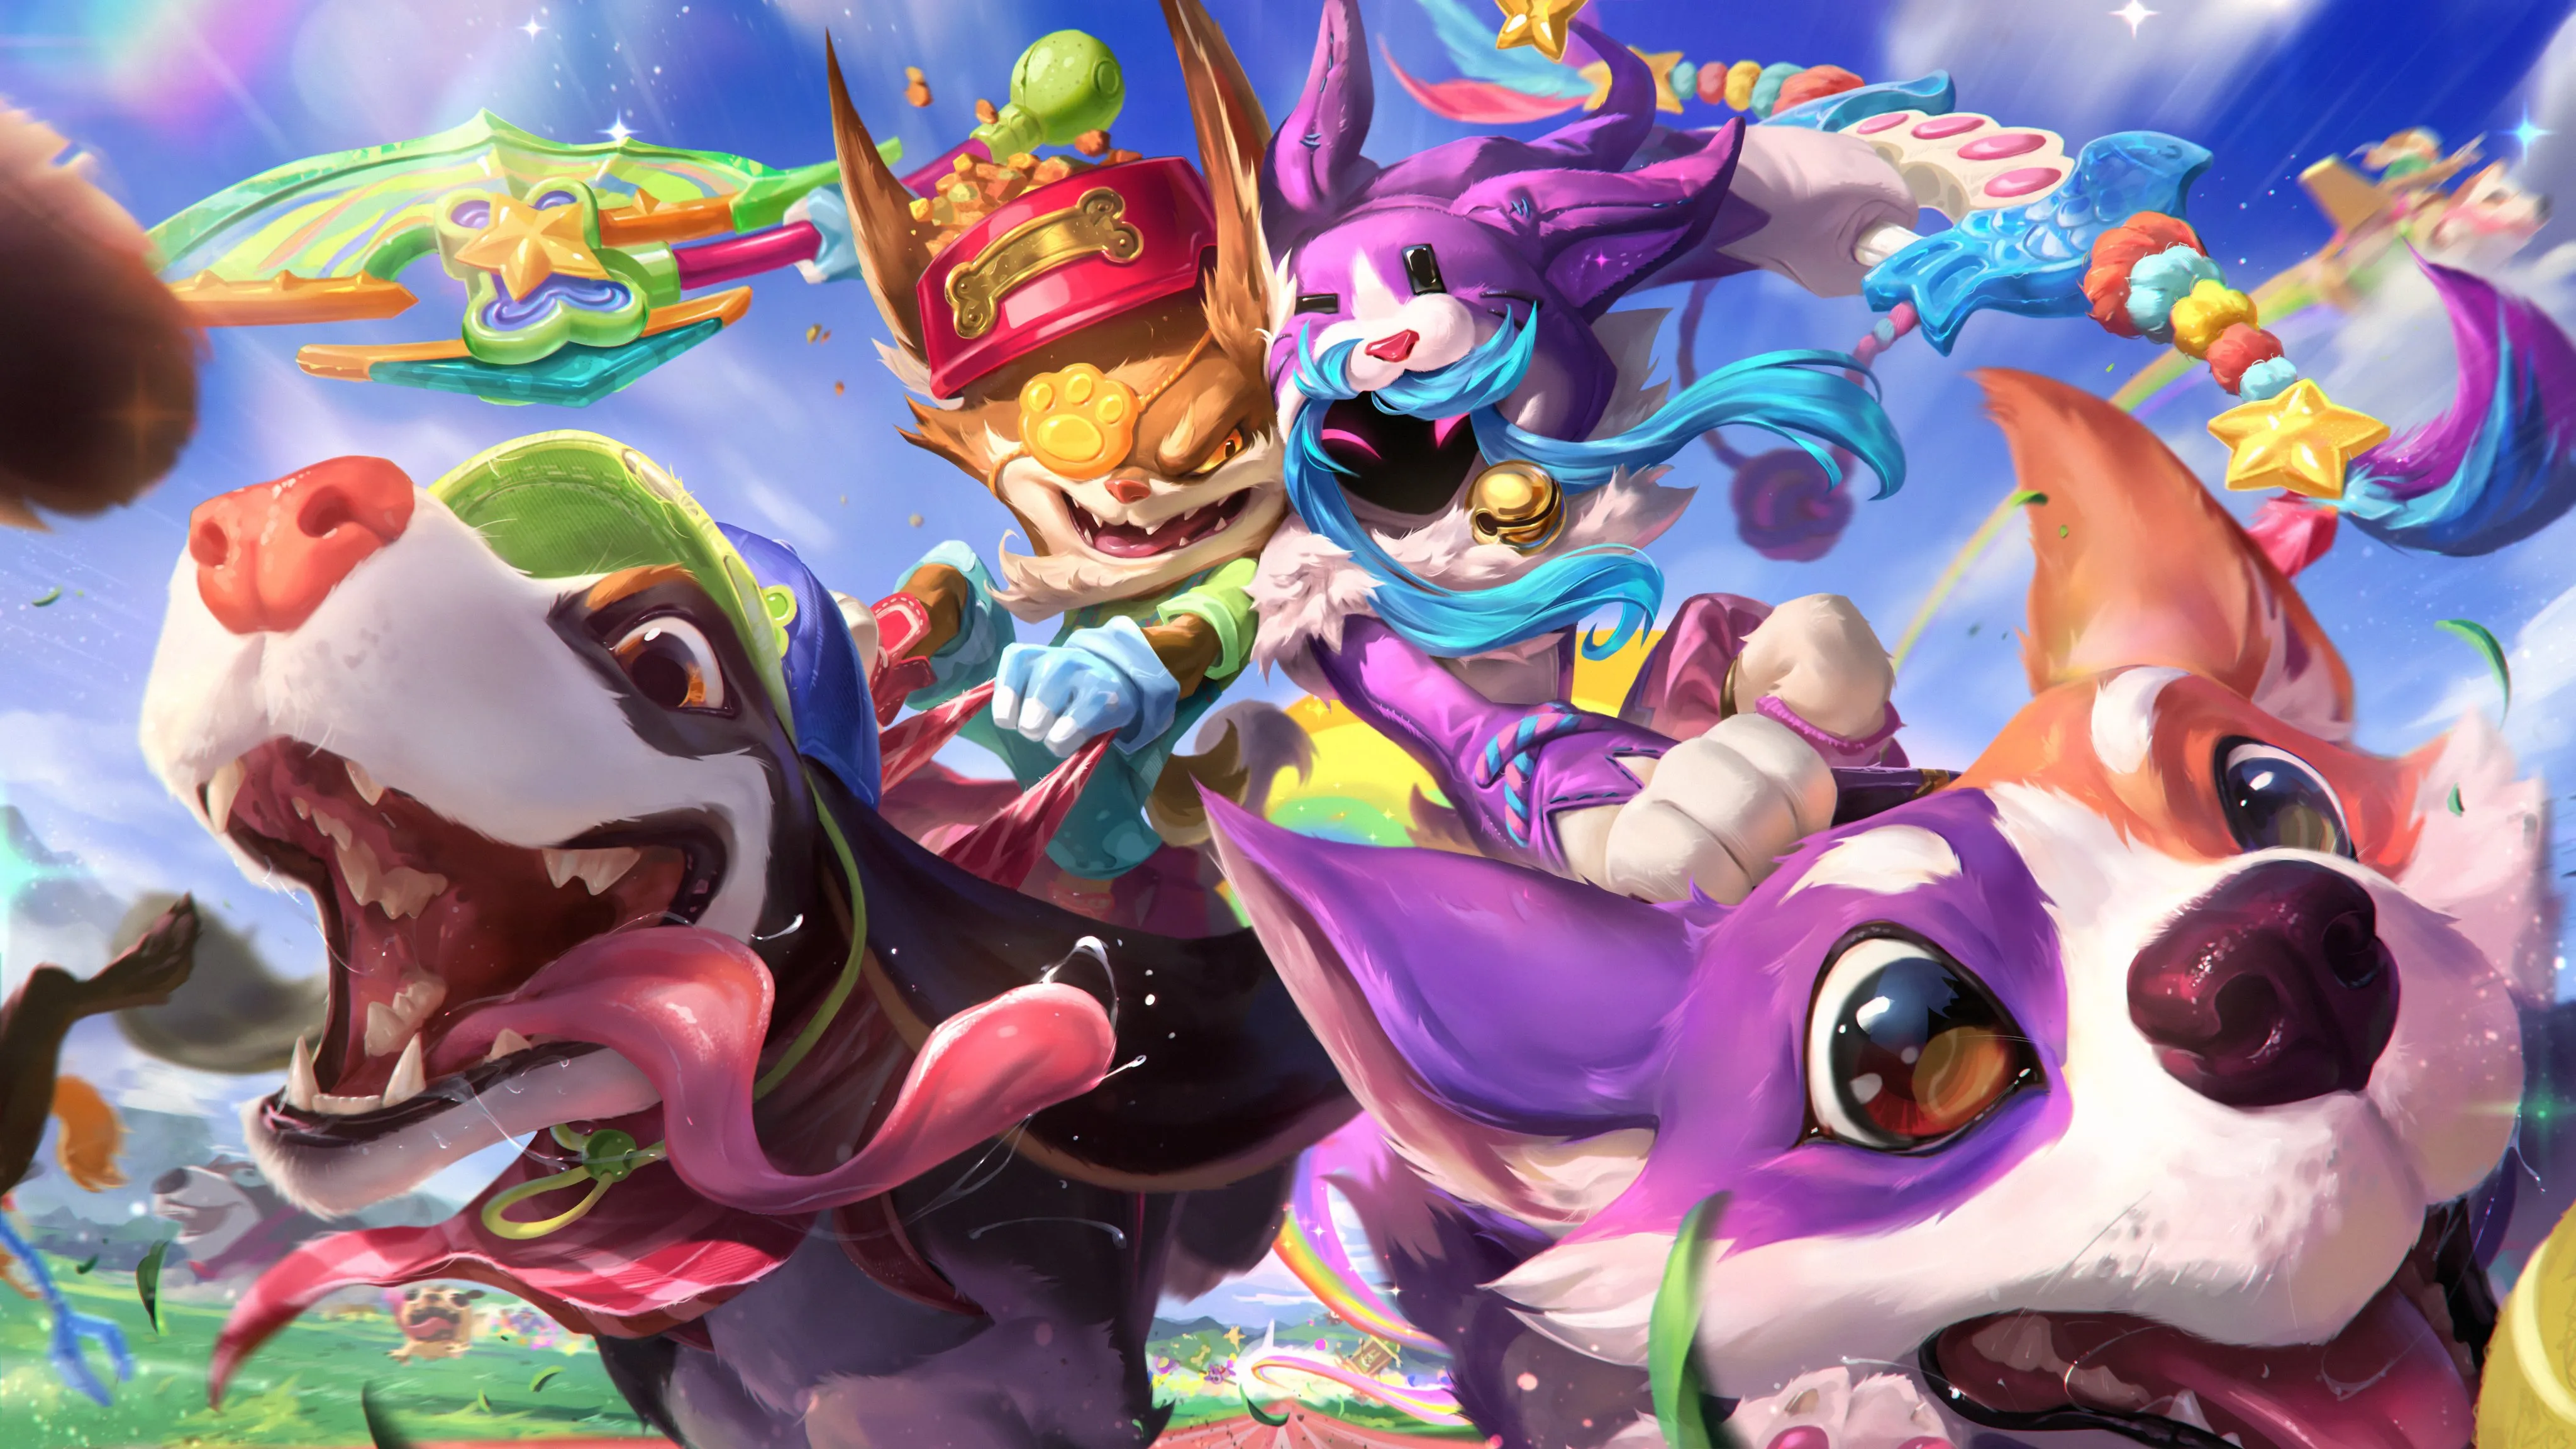 League of Legends April Fools skins coming for Yuumi, Nidalee, and more